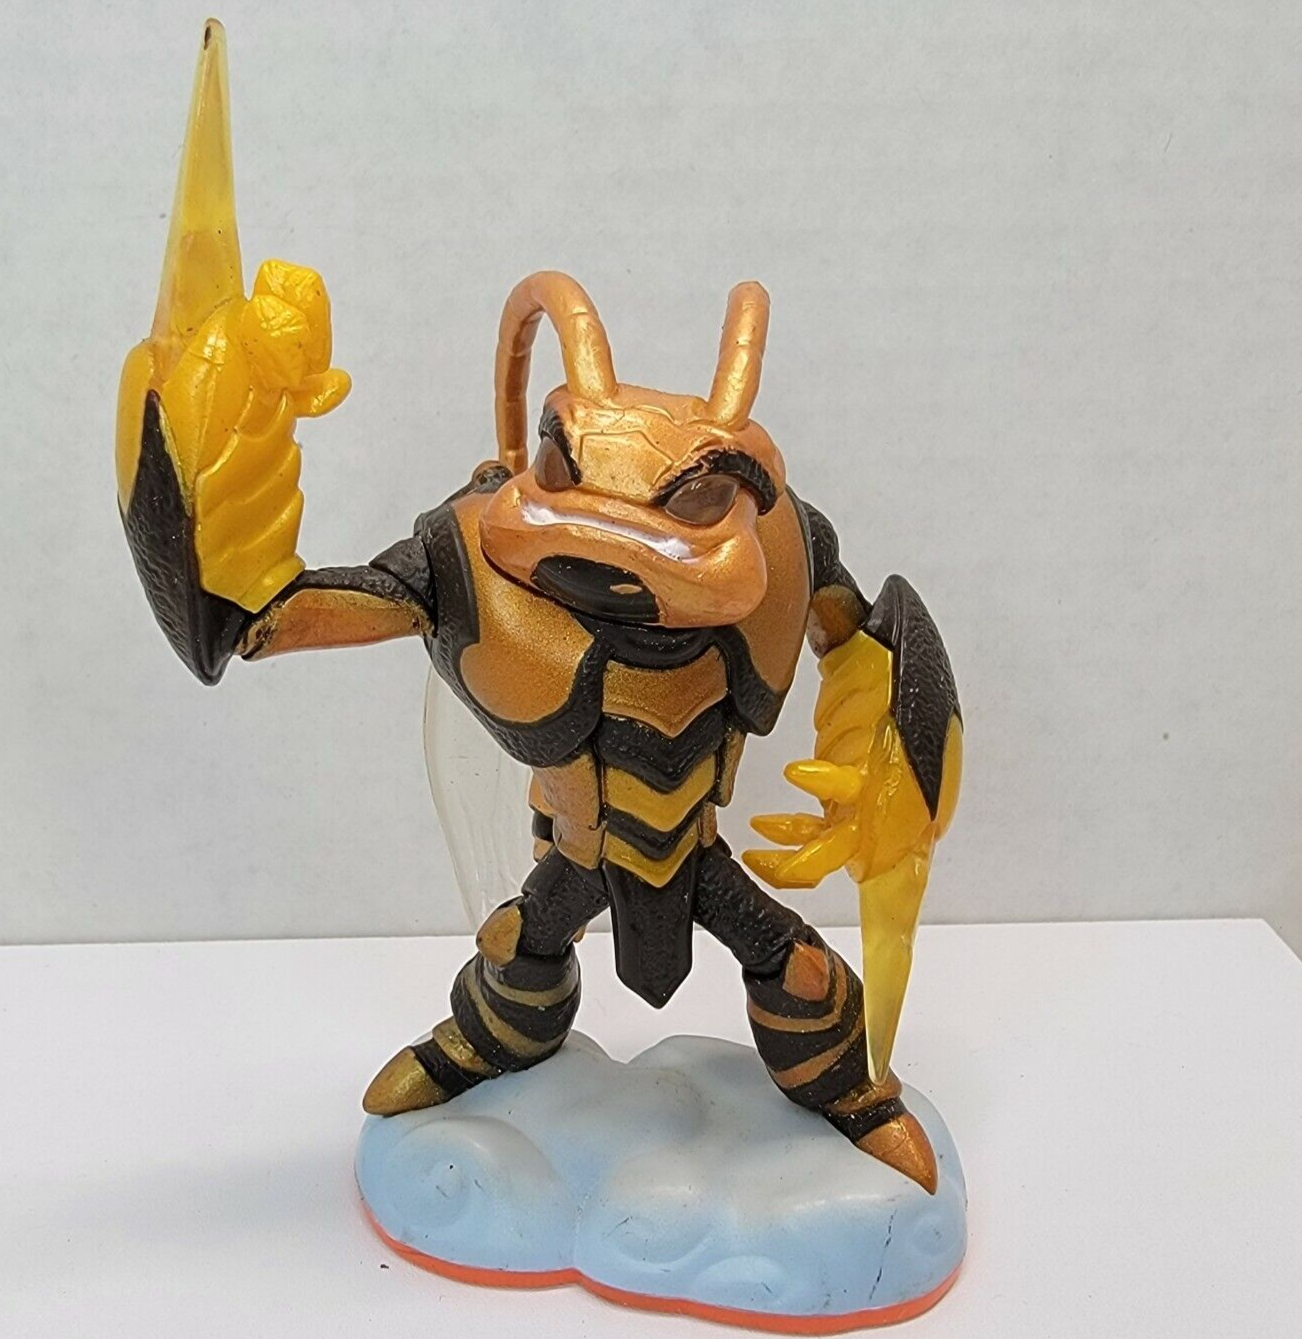 Primary image for Activision Skylanders Figure ~ "Swarm" - Giants - 2012 - 84525888